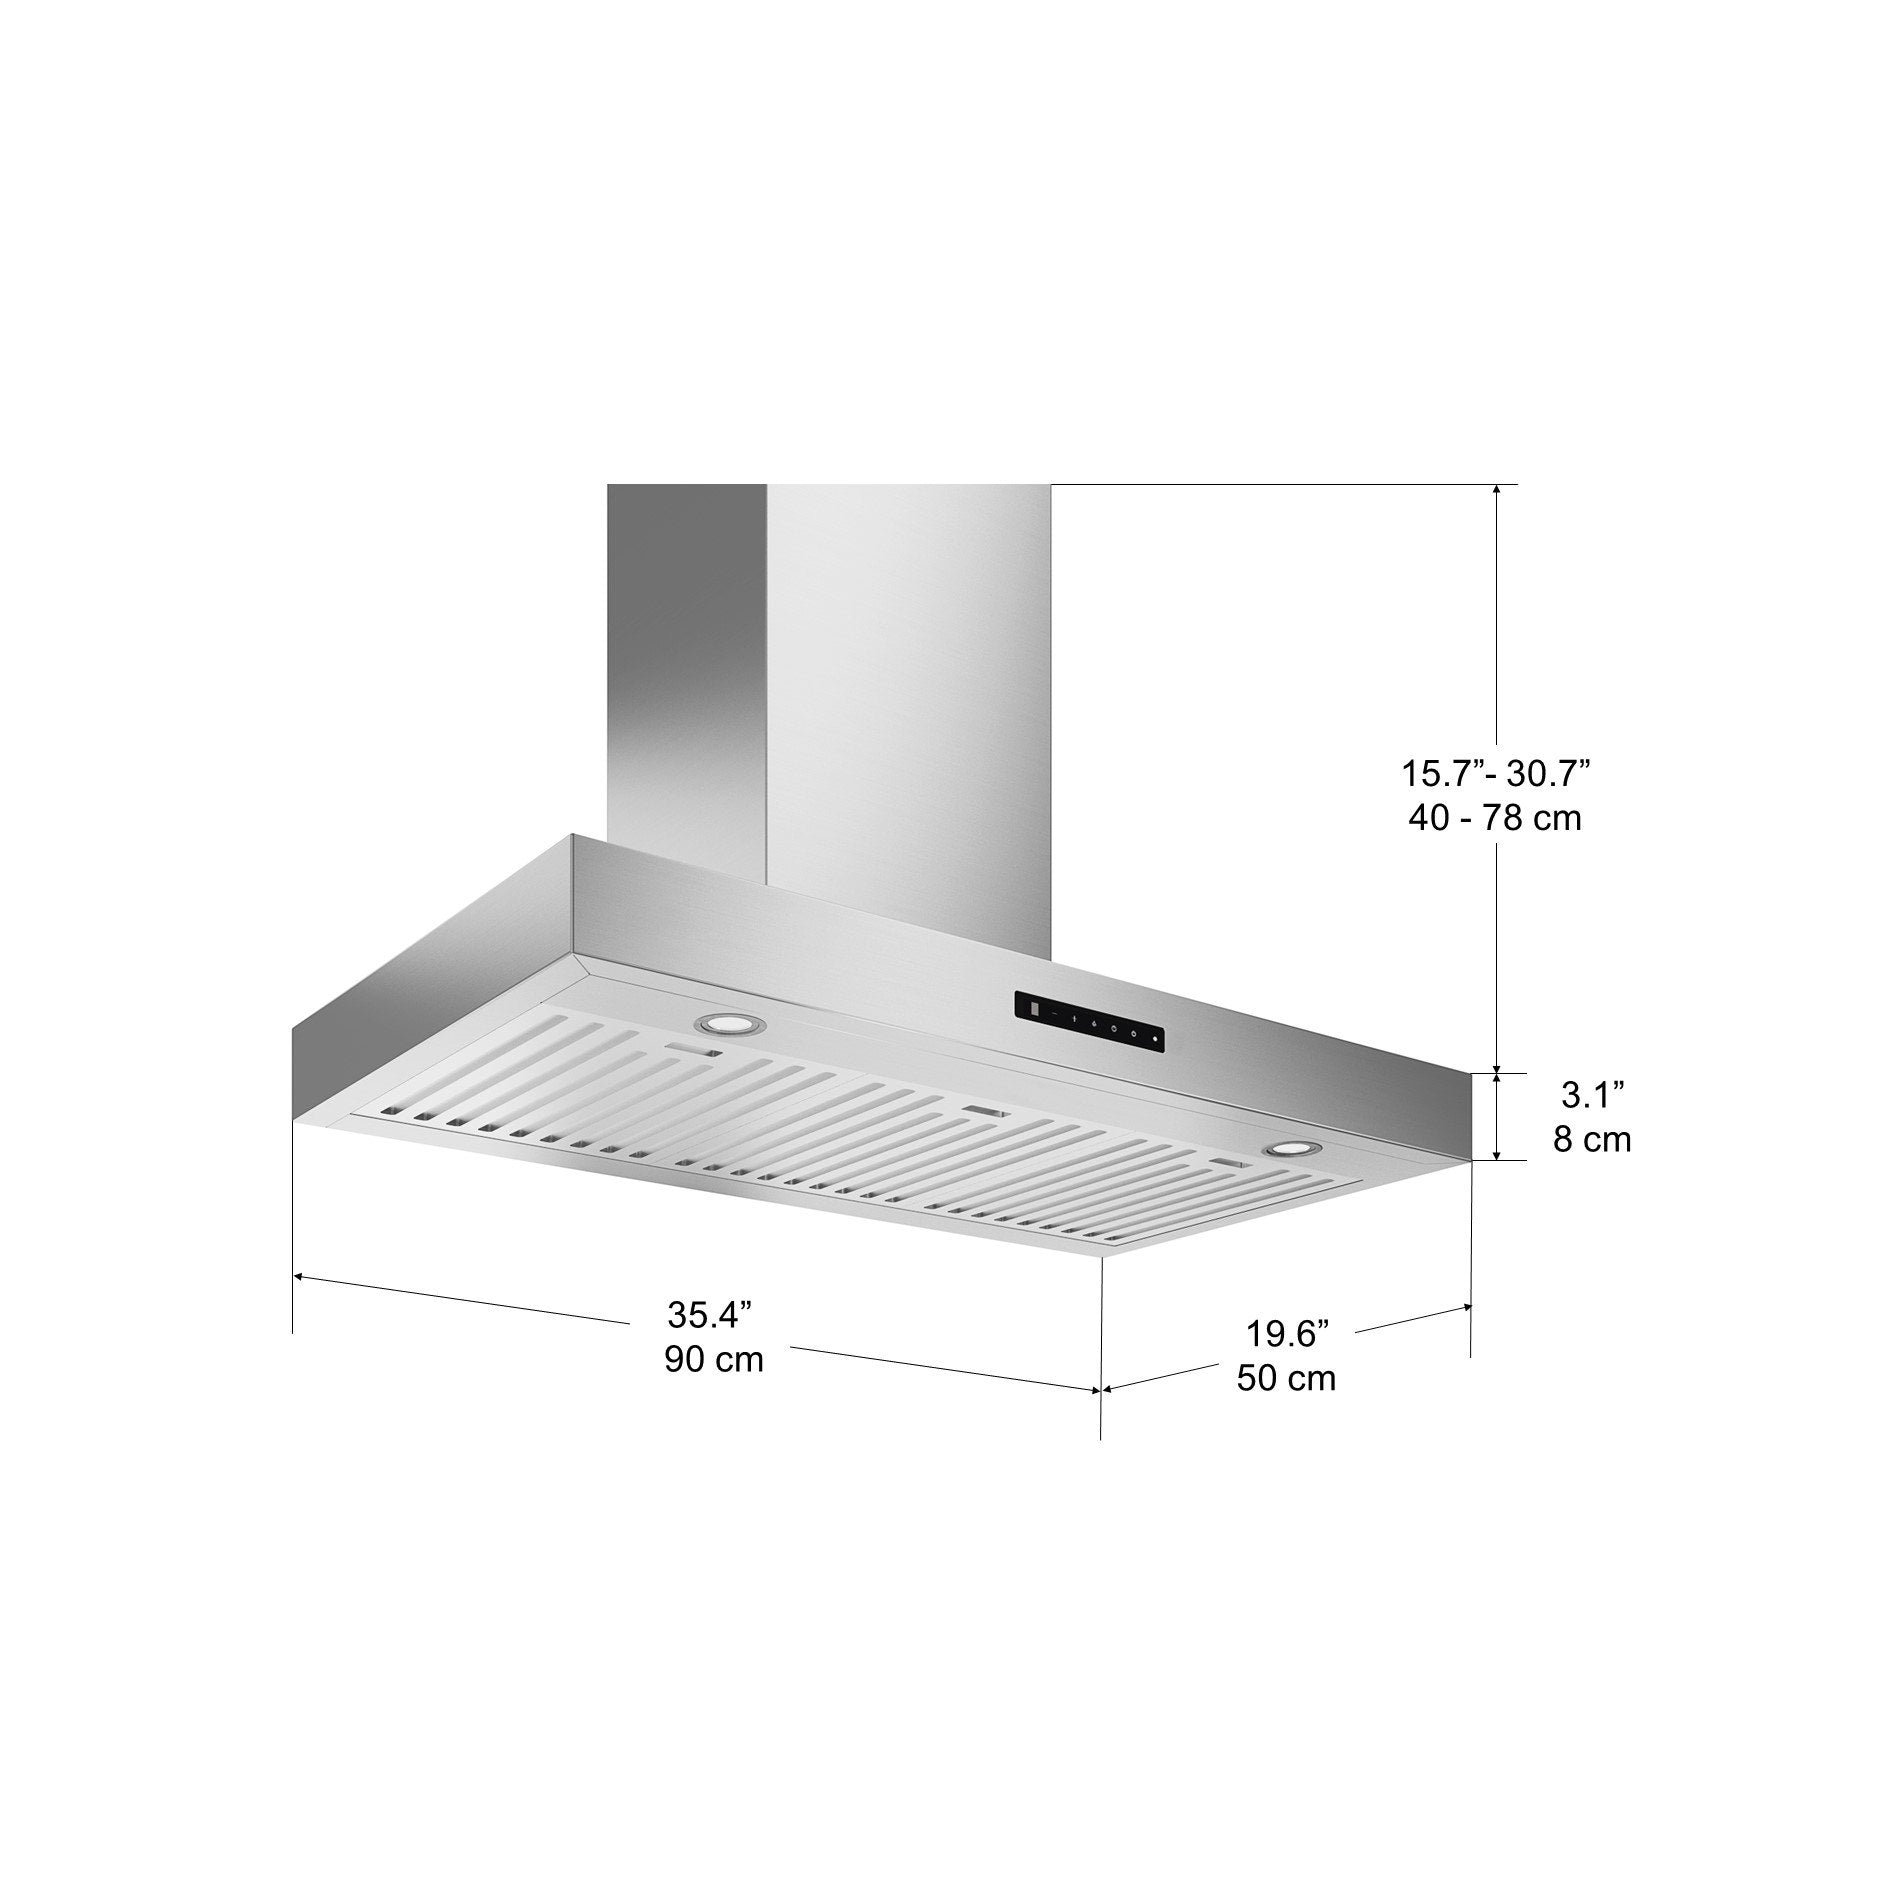 Moderna 36 in. Wall Mount Range Hood in Stainless Steel with Night Light Feature